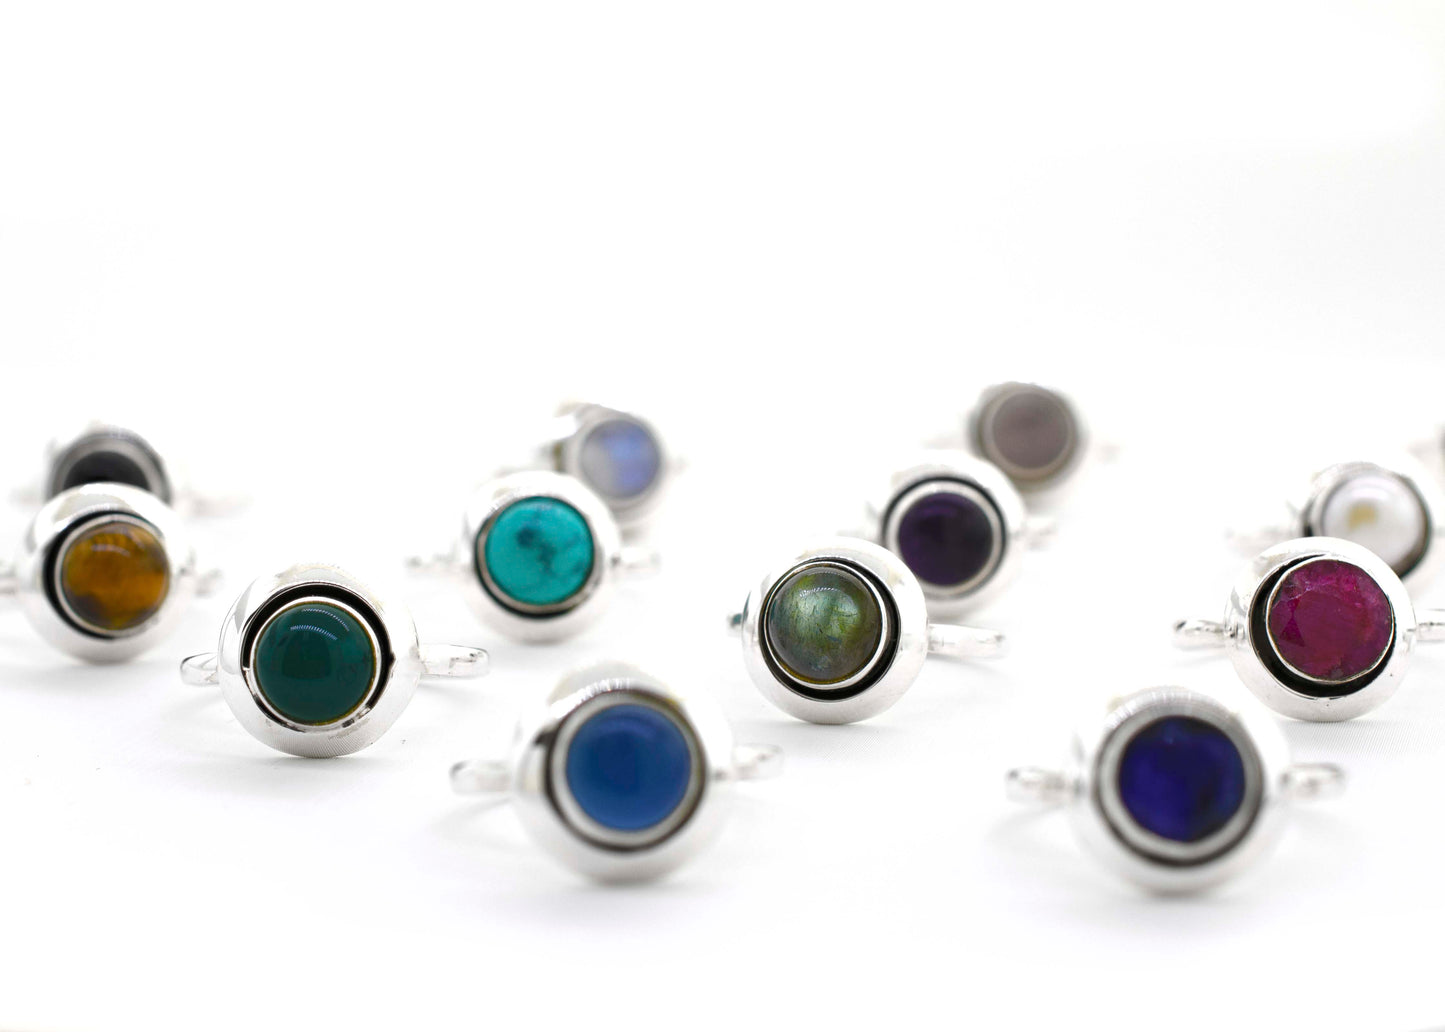 A boho-inspired collection of Round Gemstone Rings With Oxidized Outline, featuring various colored stones crafted in sterling silver, perfect for the free-spirited hippie.